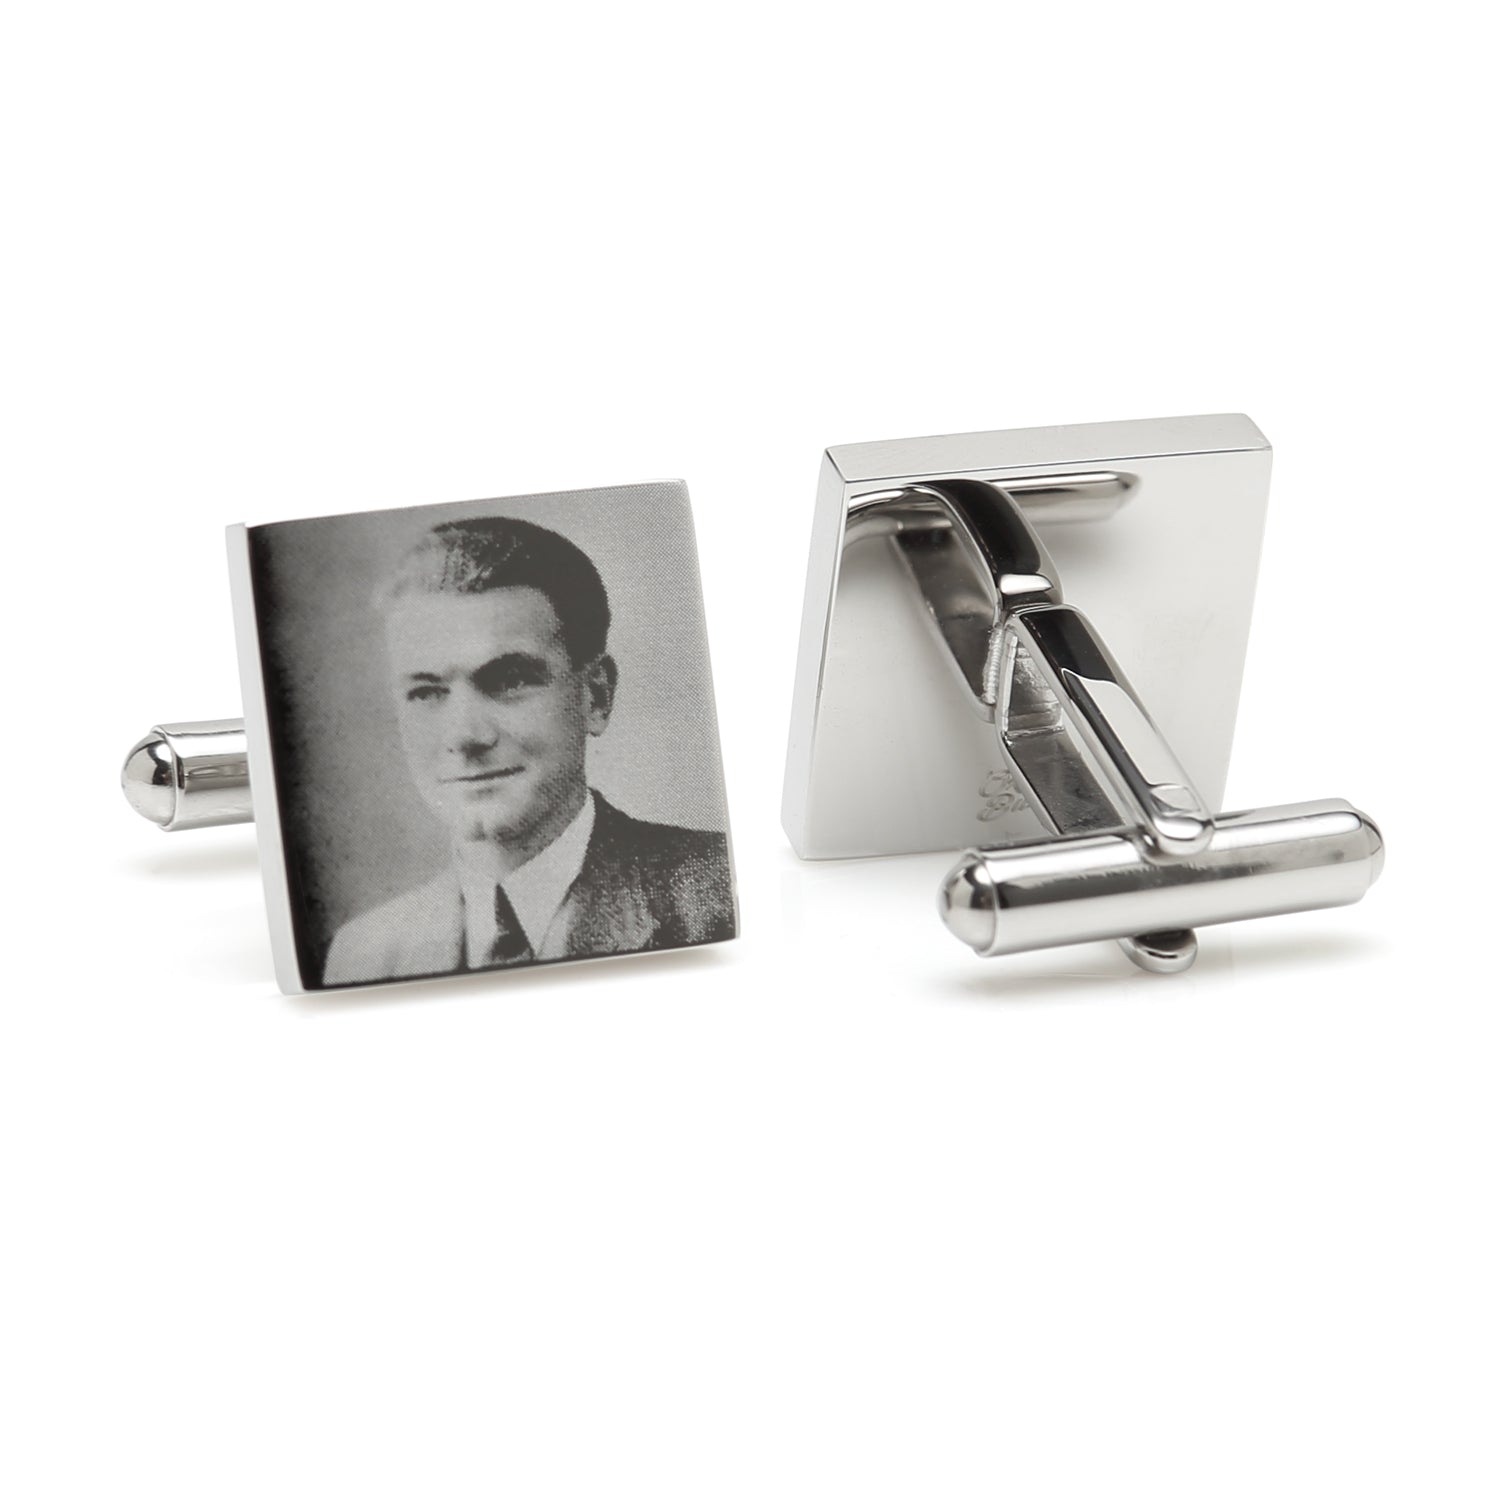 Ox & Bull Trading Co. Men's Cufflinks and Accessories – Page 4